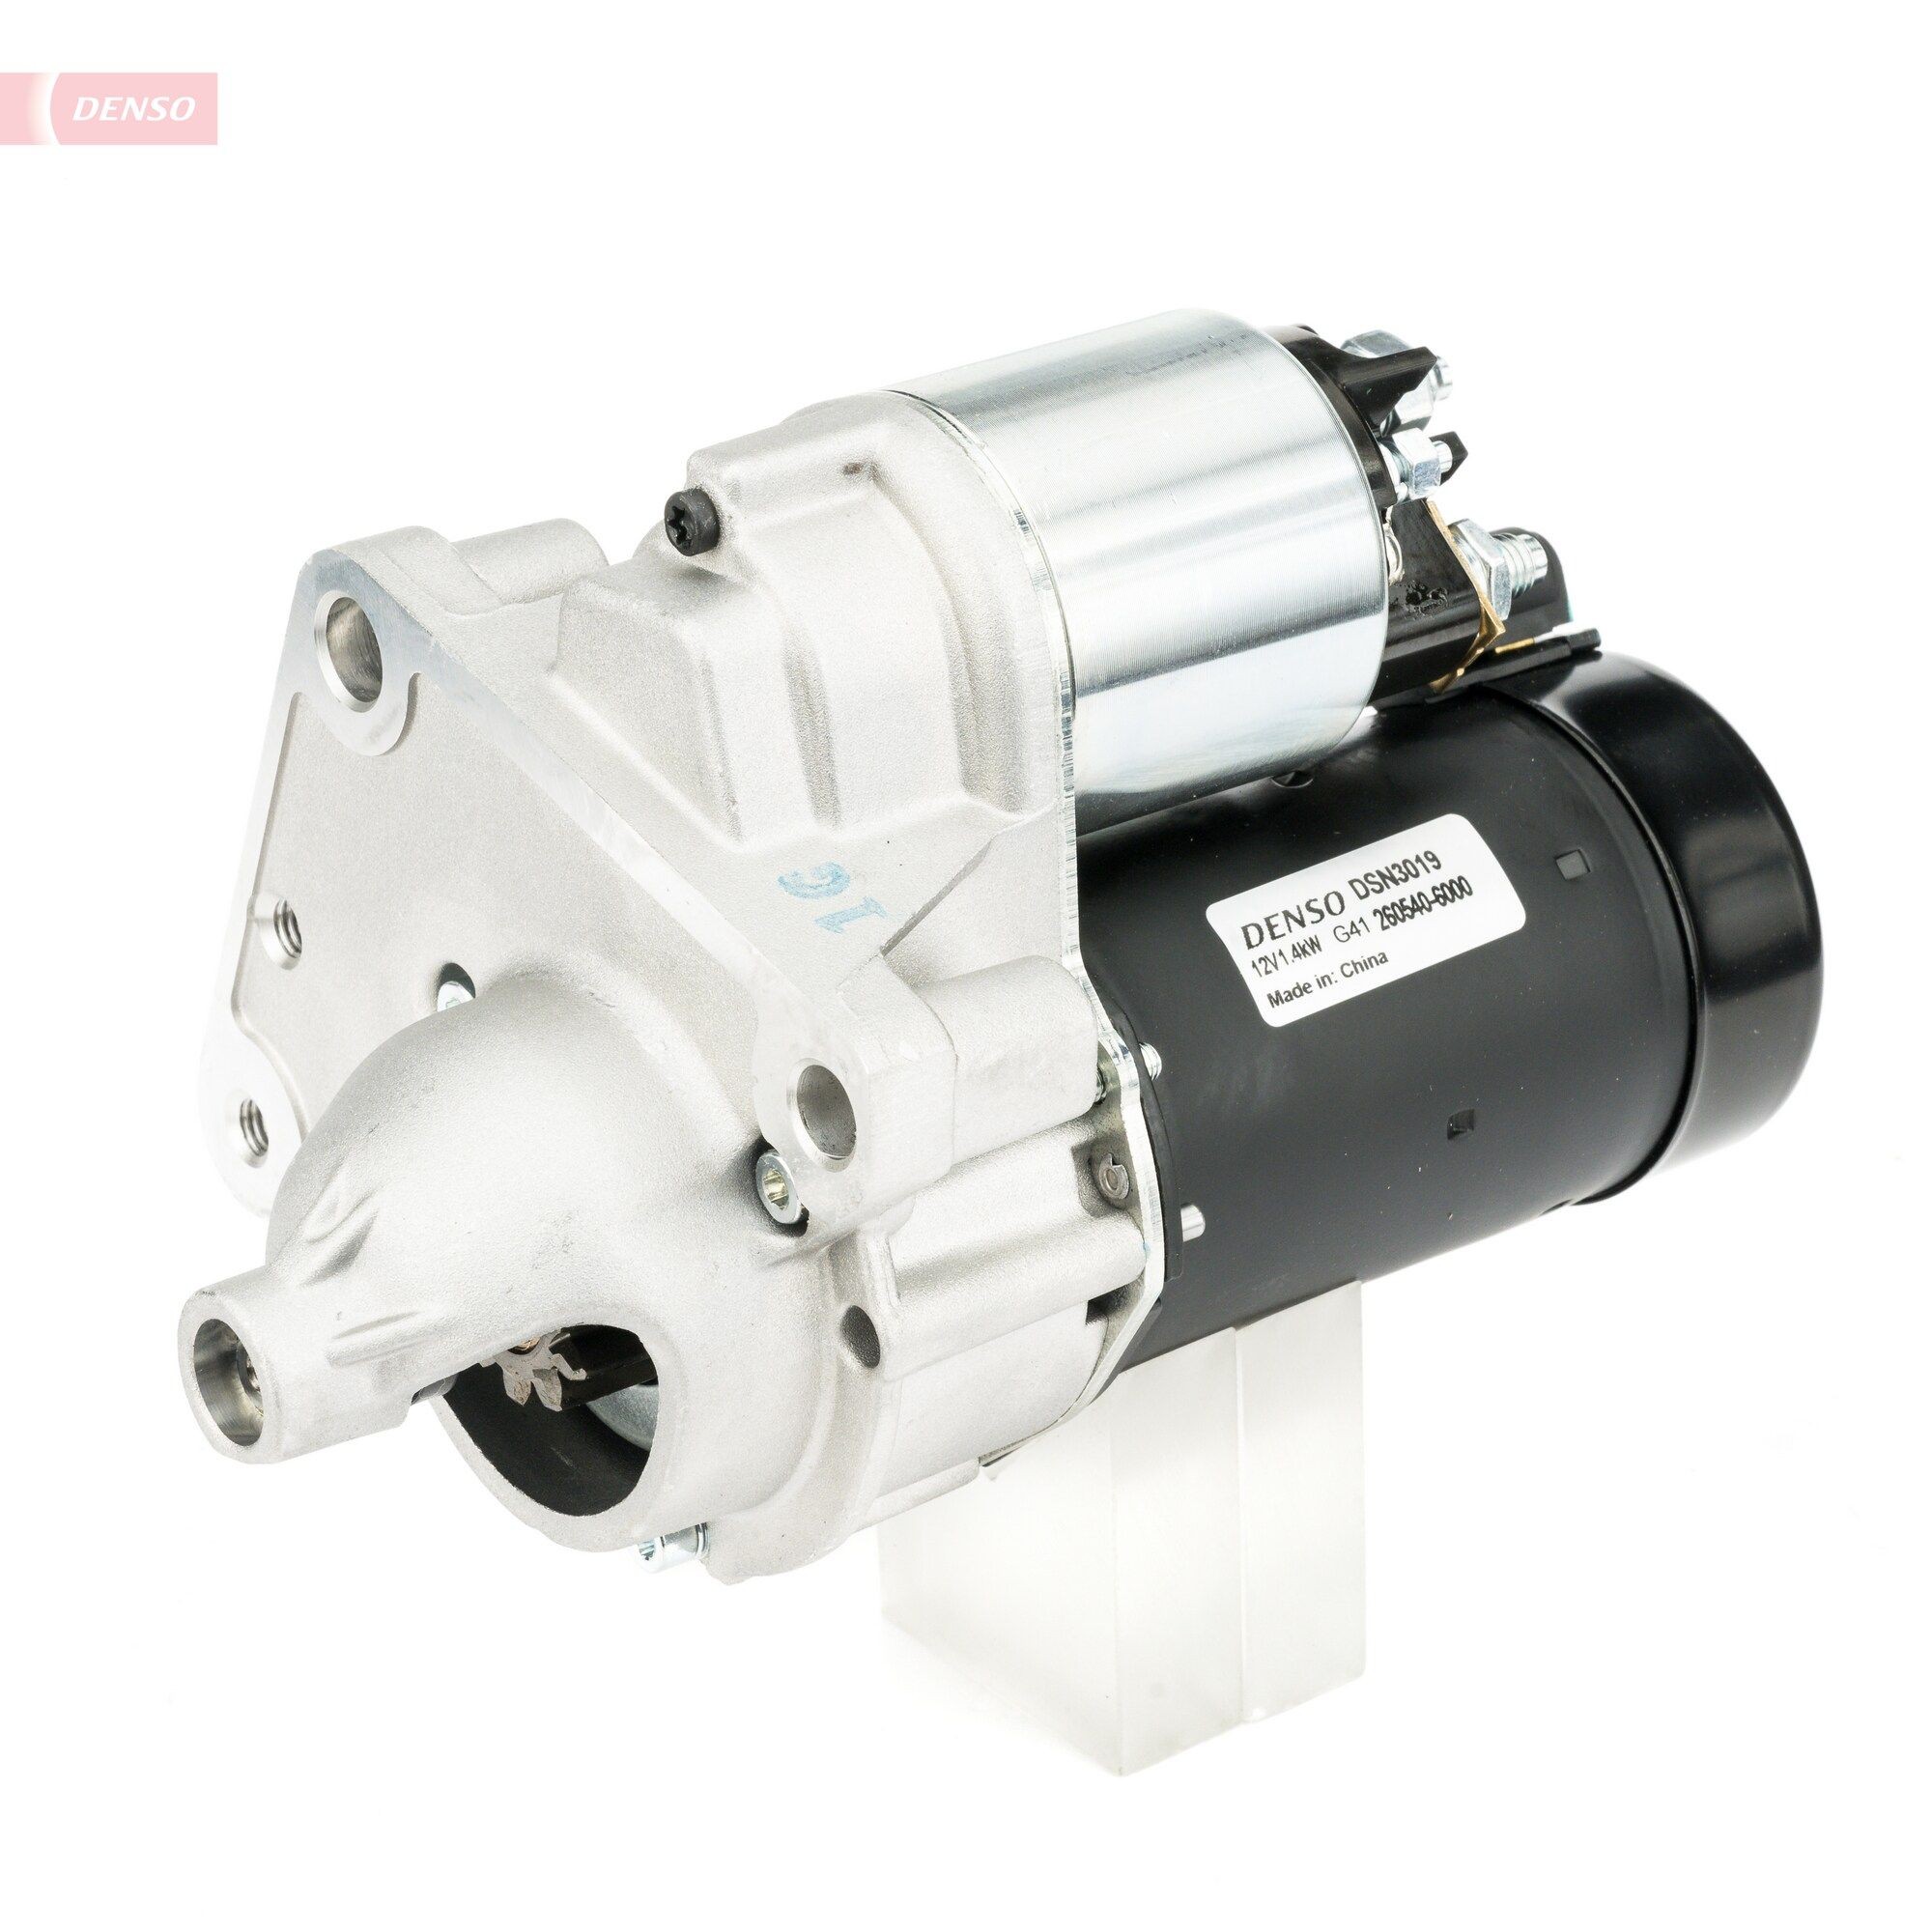 DENSO DSN3019 Starter motor PEUGEOT experience and price